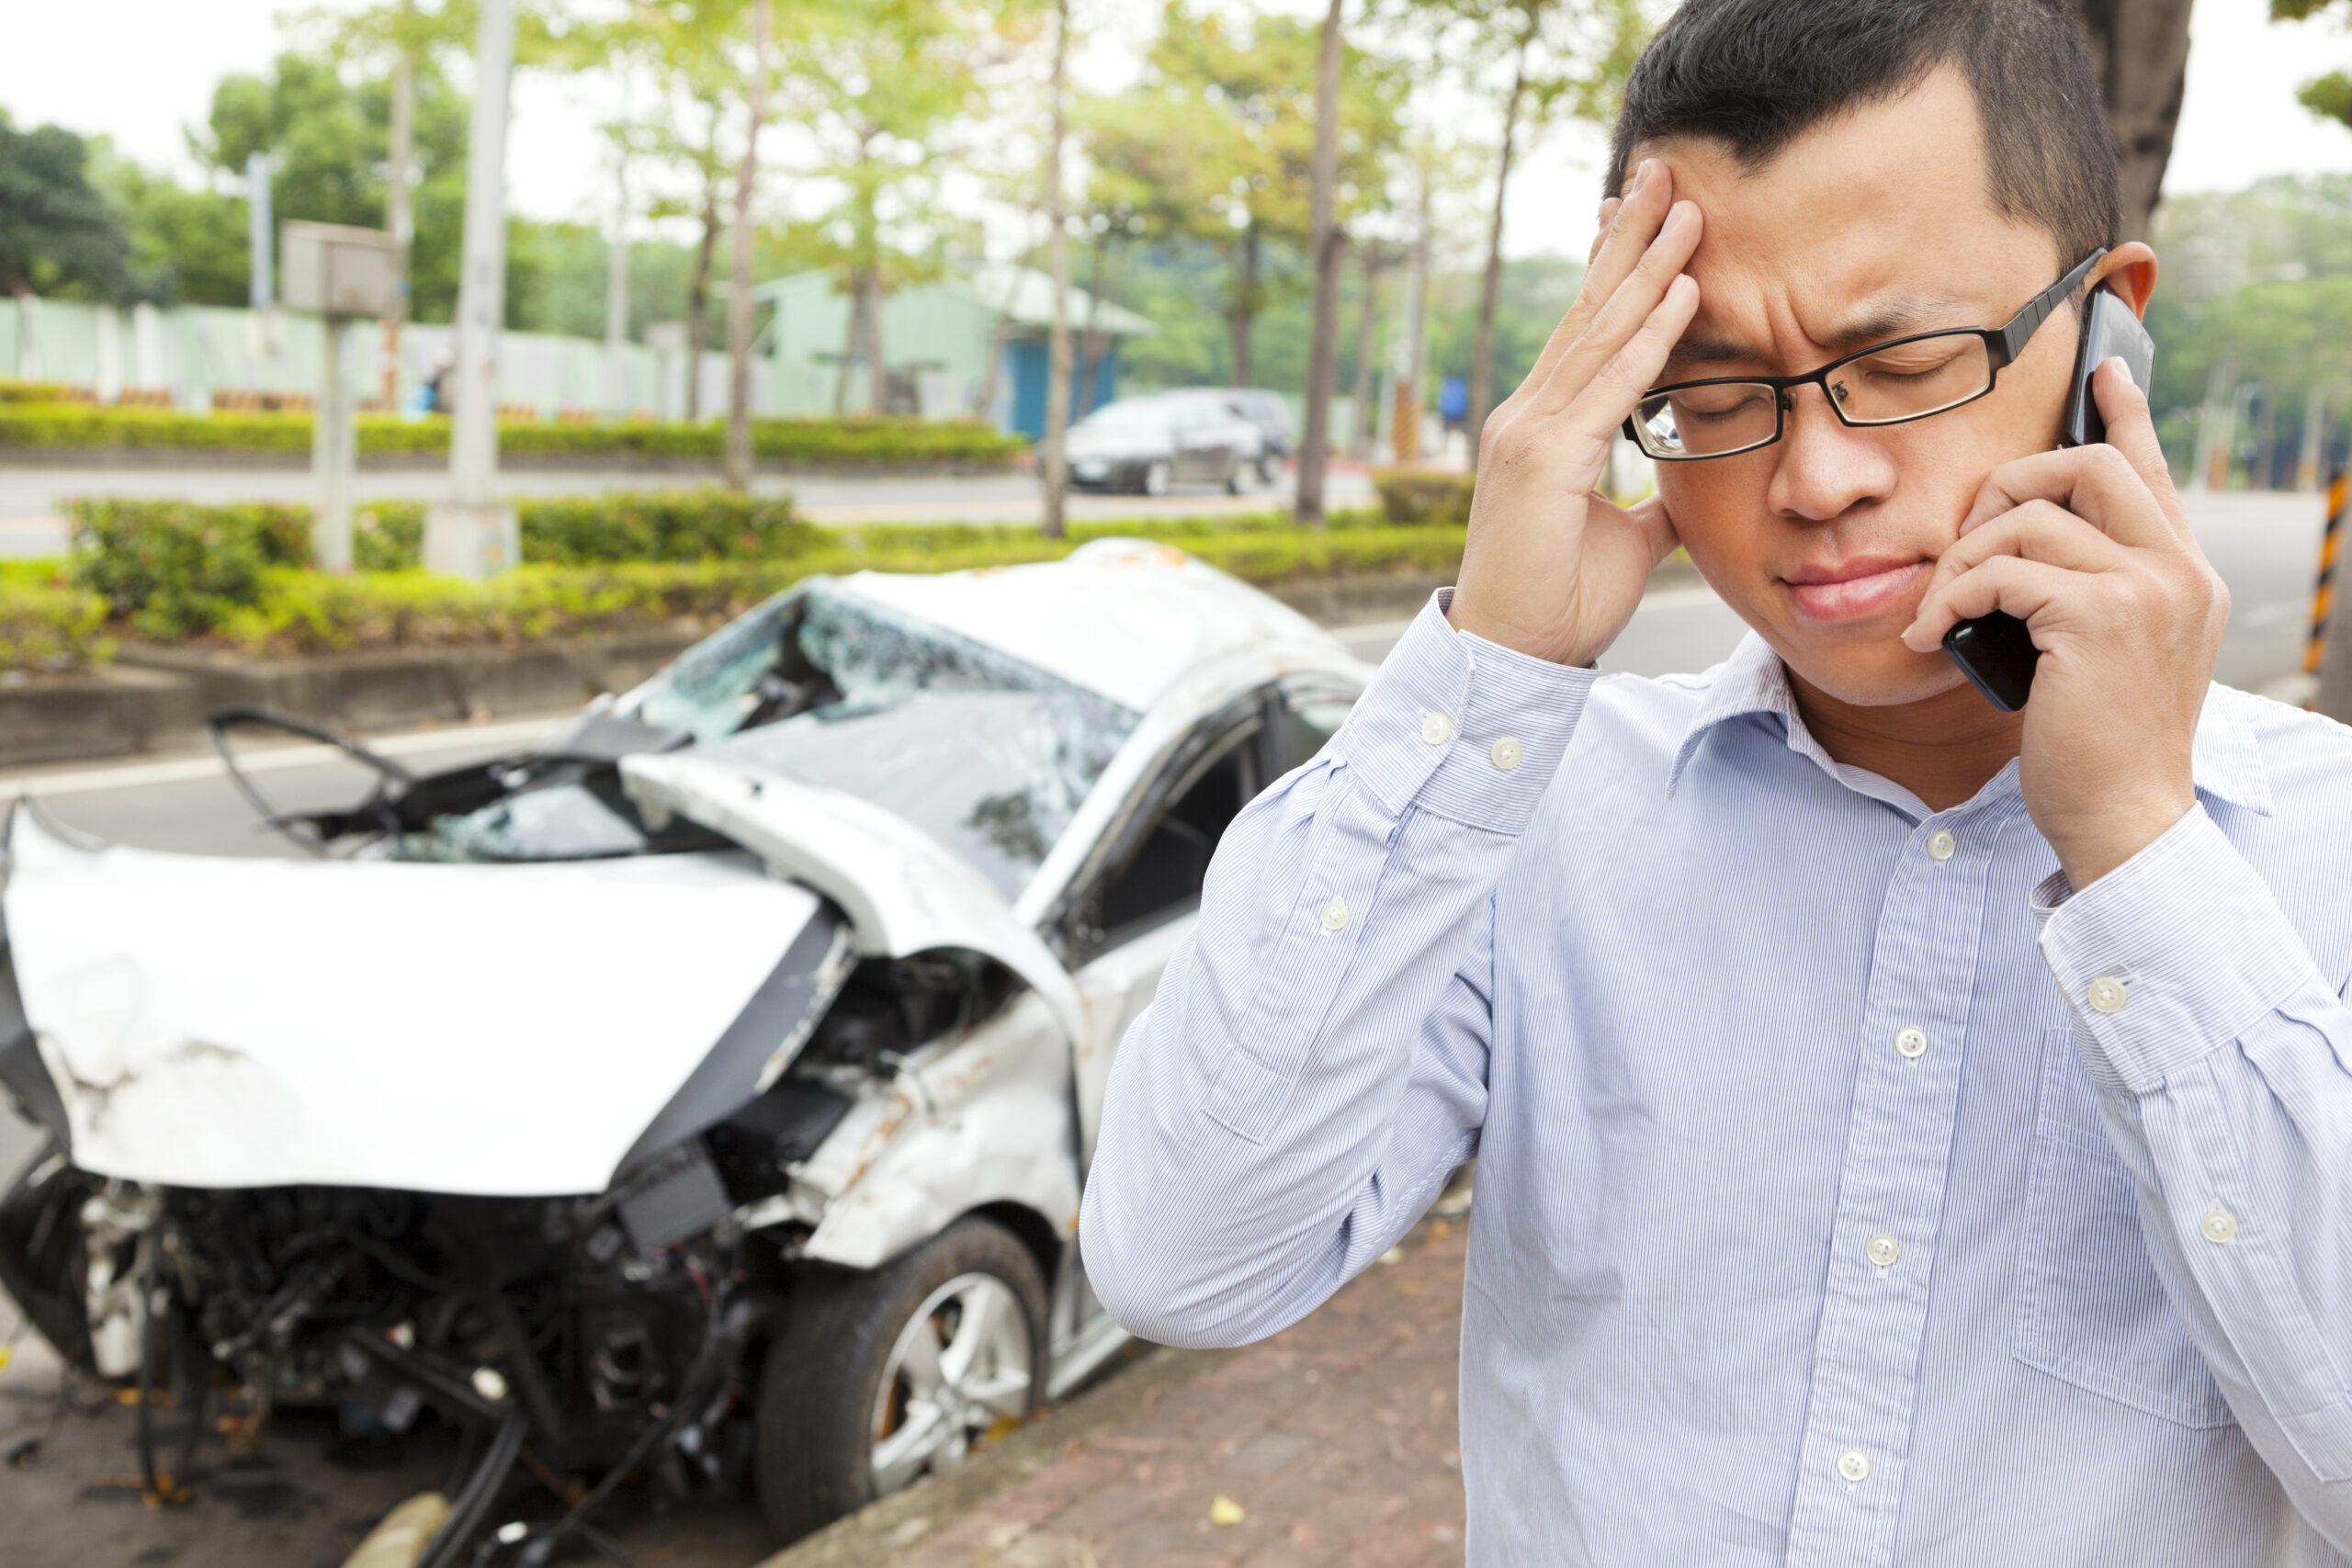 6 Myths About Car Accidents